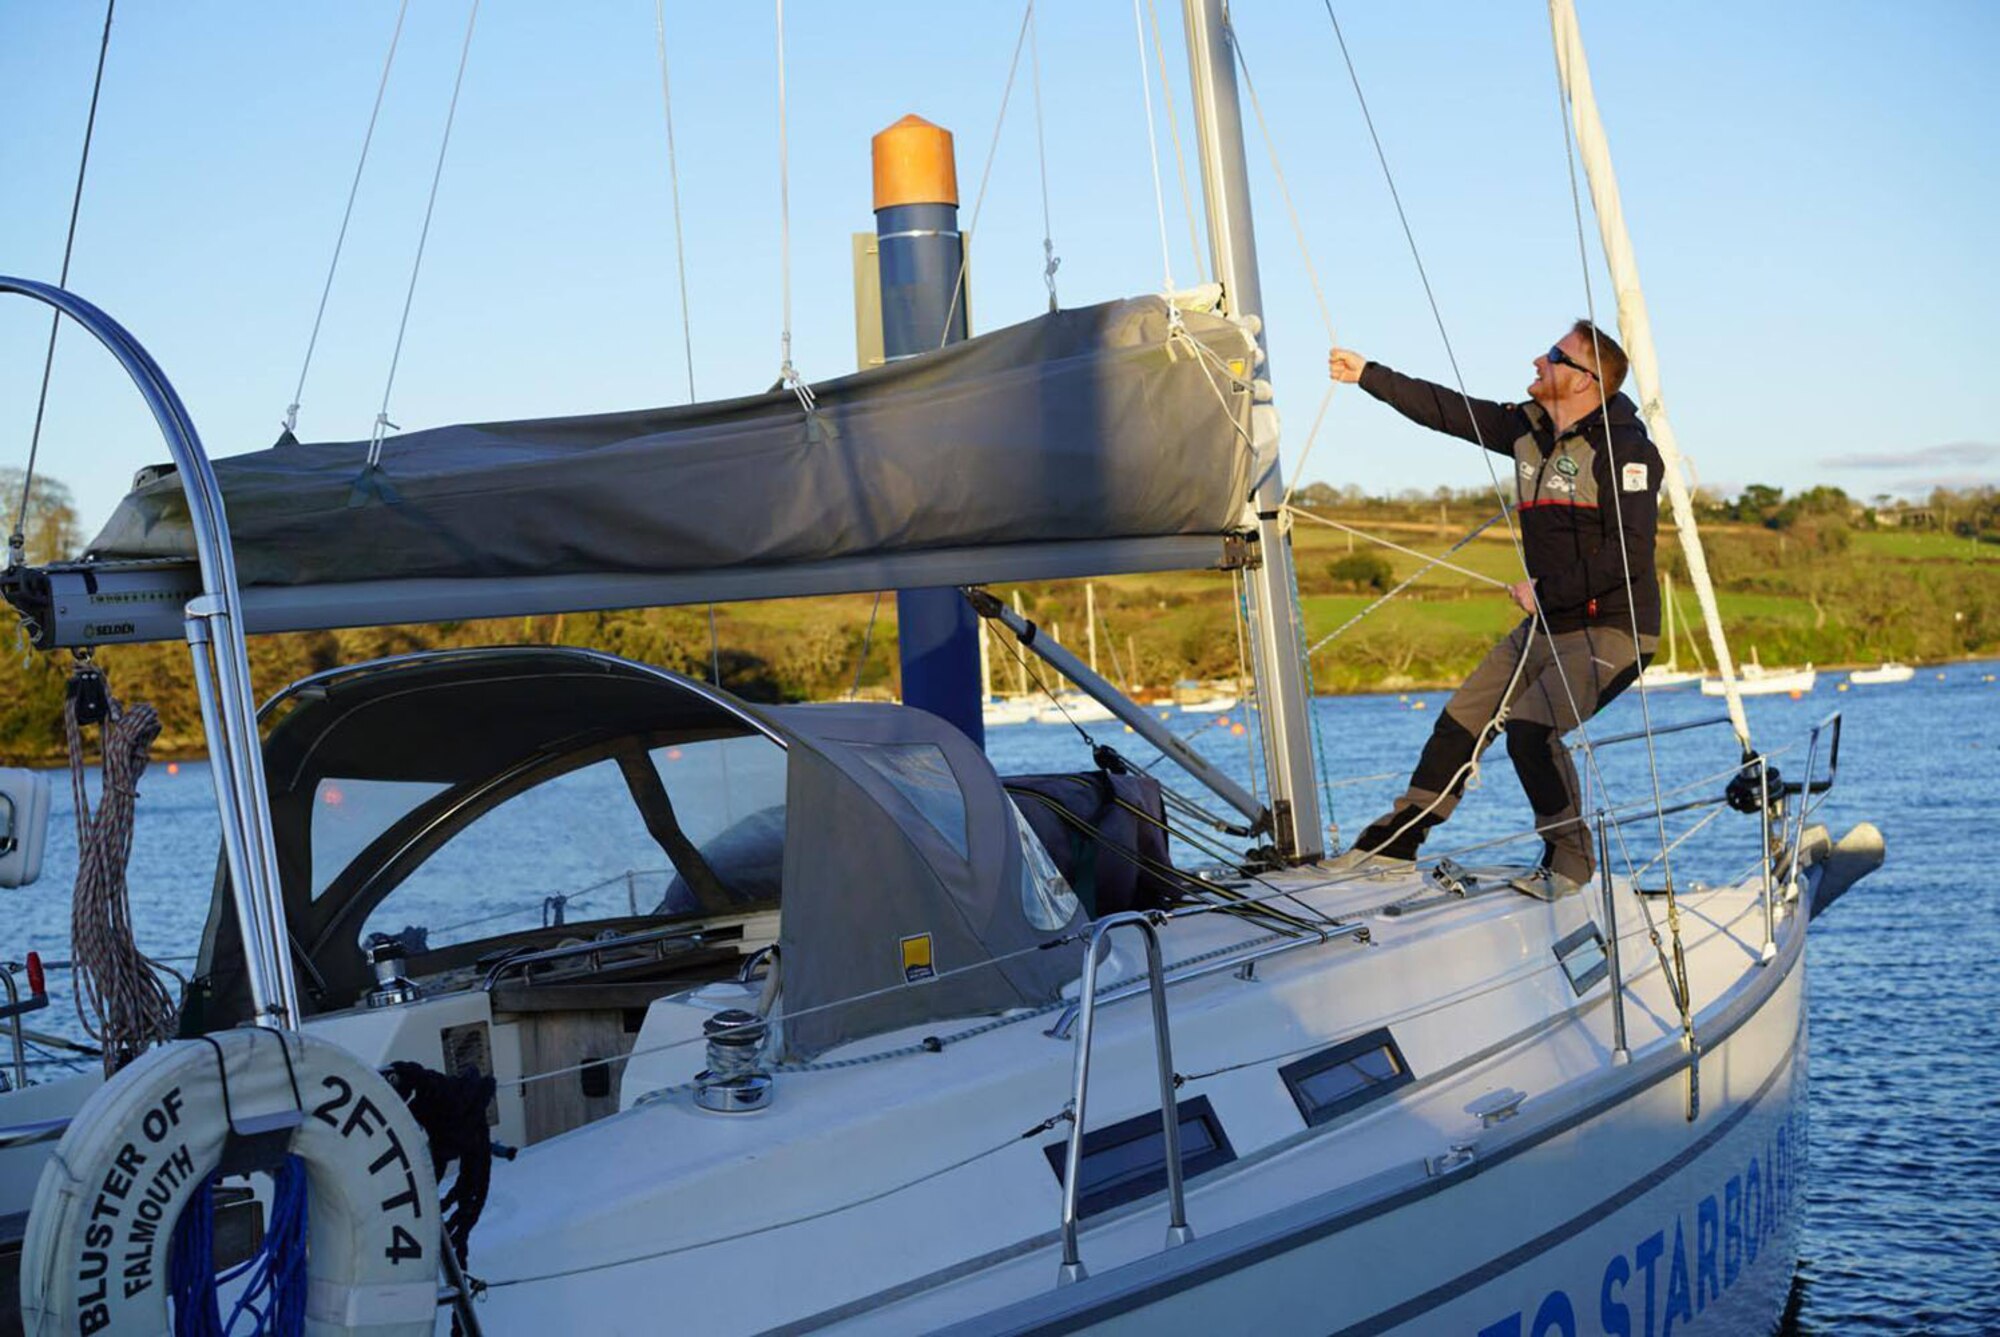 Ray Hoogendijk, 100th Force Support Squadron Outdoor Recreation program manager, instructs students on how to raise sails on a 34-foot training yacht Jan. 25, 2017, in Cornwall, England. Hoogendijk spent 16 years in the British Army and has a wealth of experience organizing outdoor activities including surfing, adventure training, mountain climbing and hiking. He organizes trips and activities around the U.K. for Team Mildenhall Airmen and their families. (Courtesy photo)